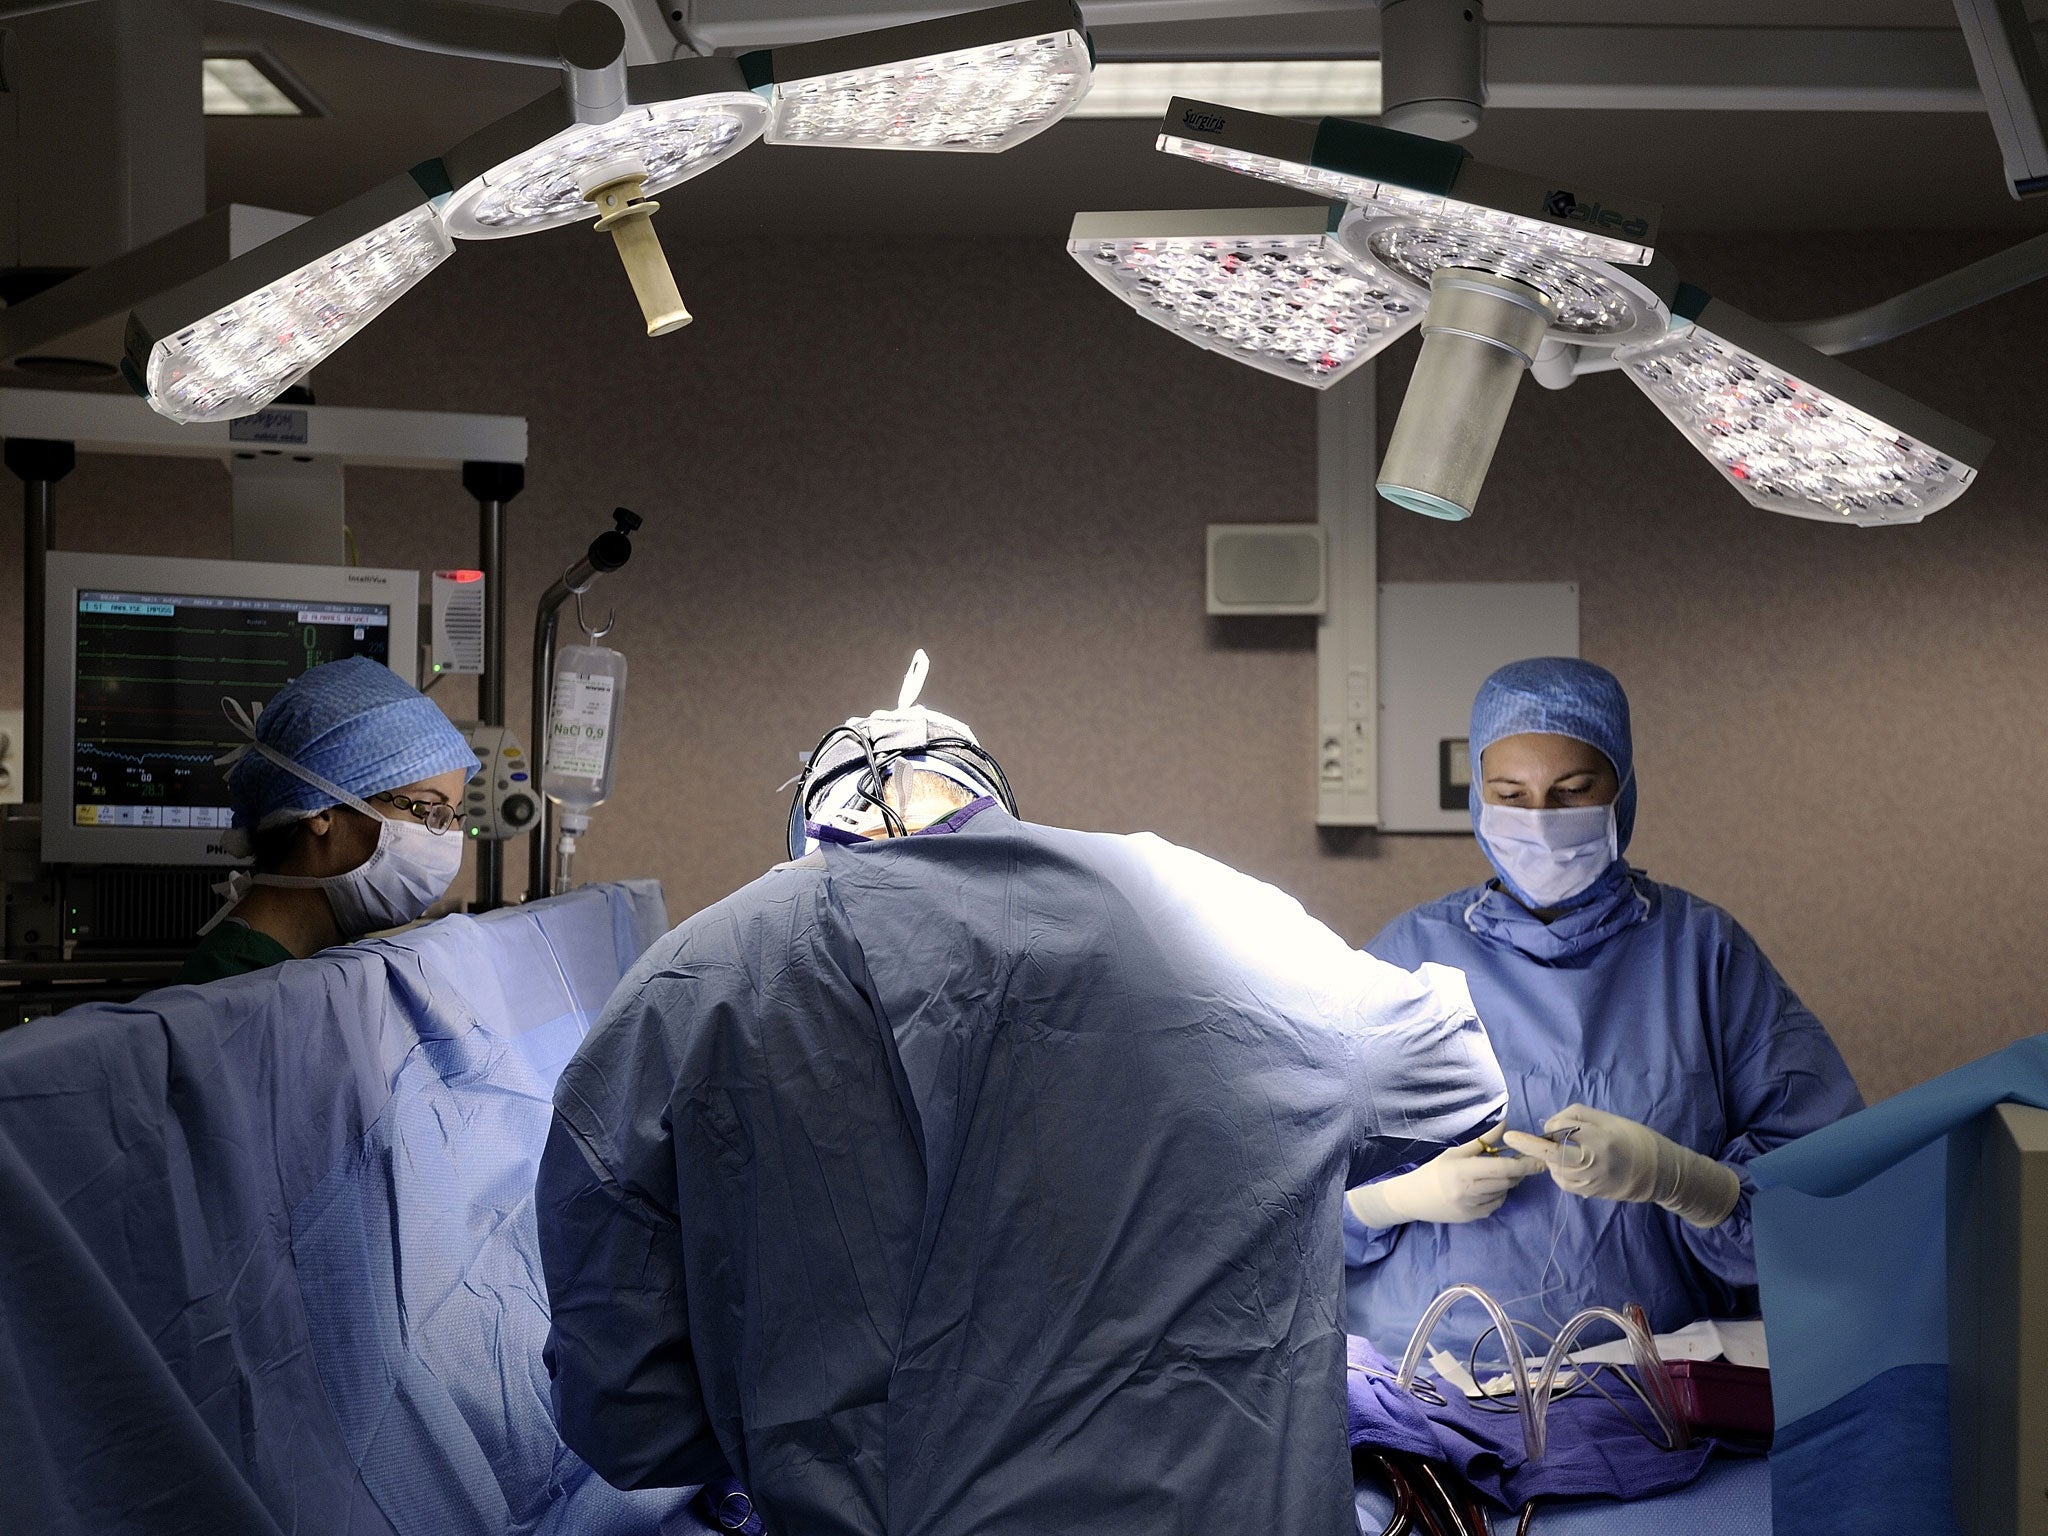 Man sues hospital who allegedly forgot to remove appendix during appendectomy